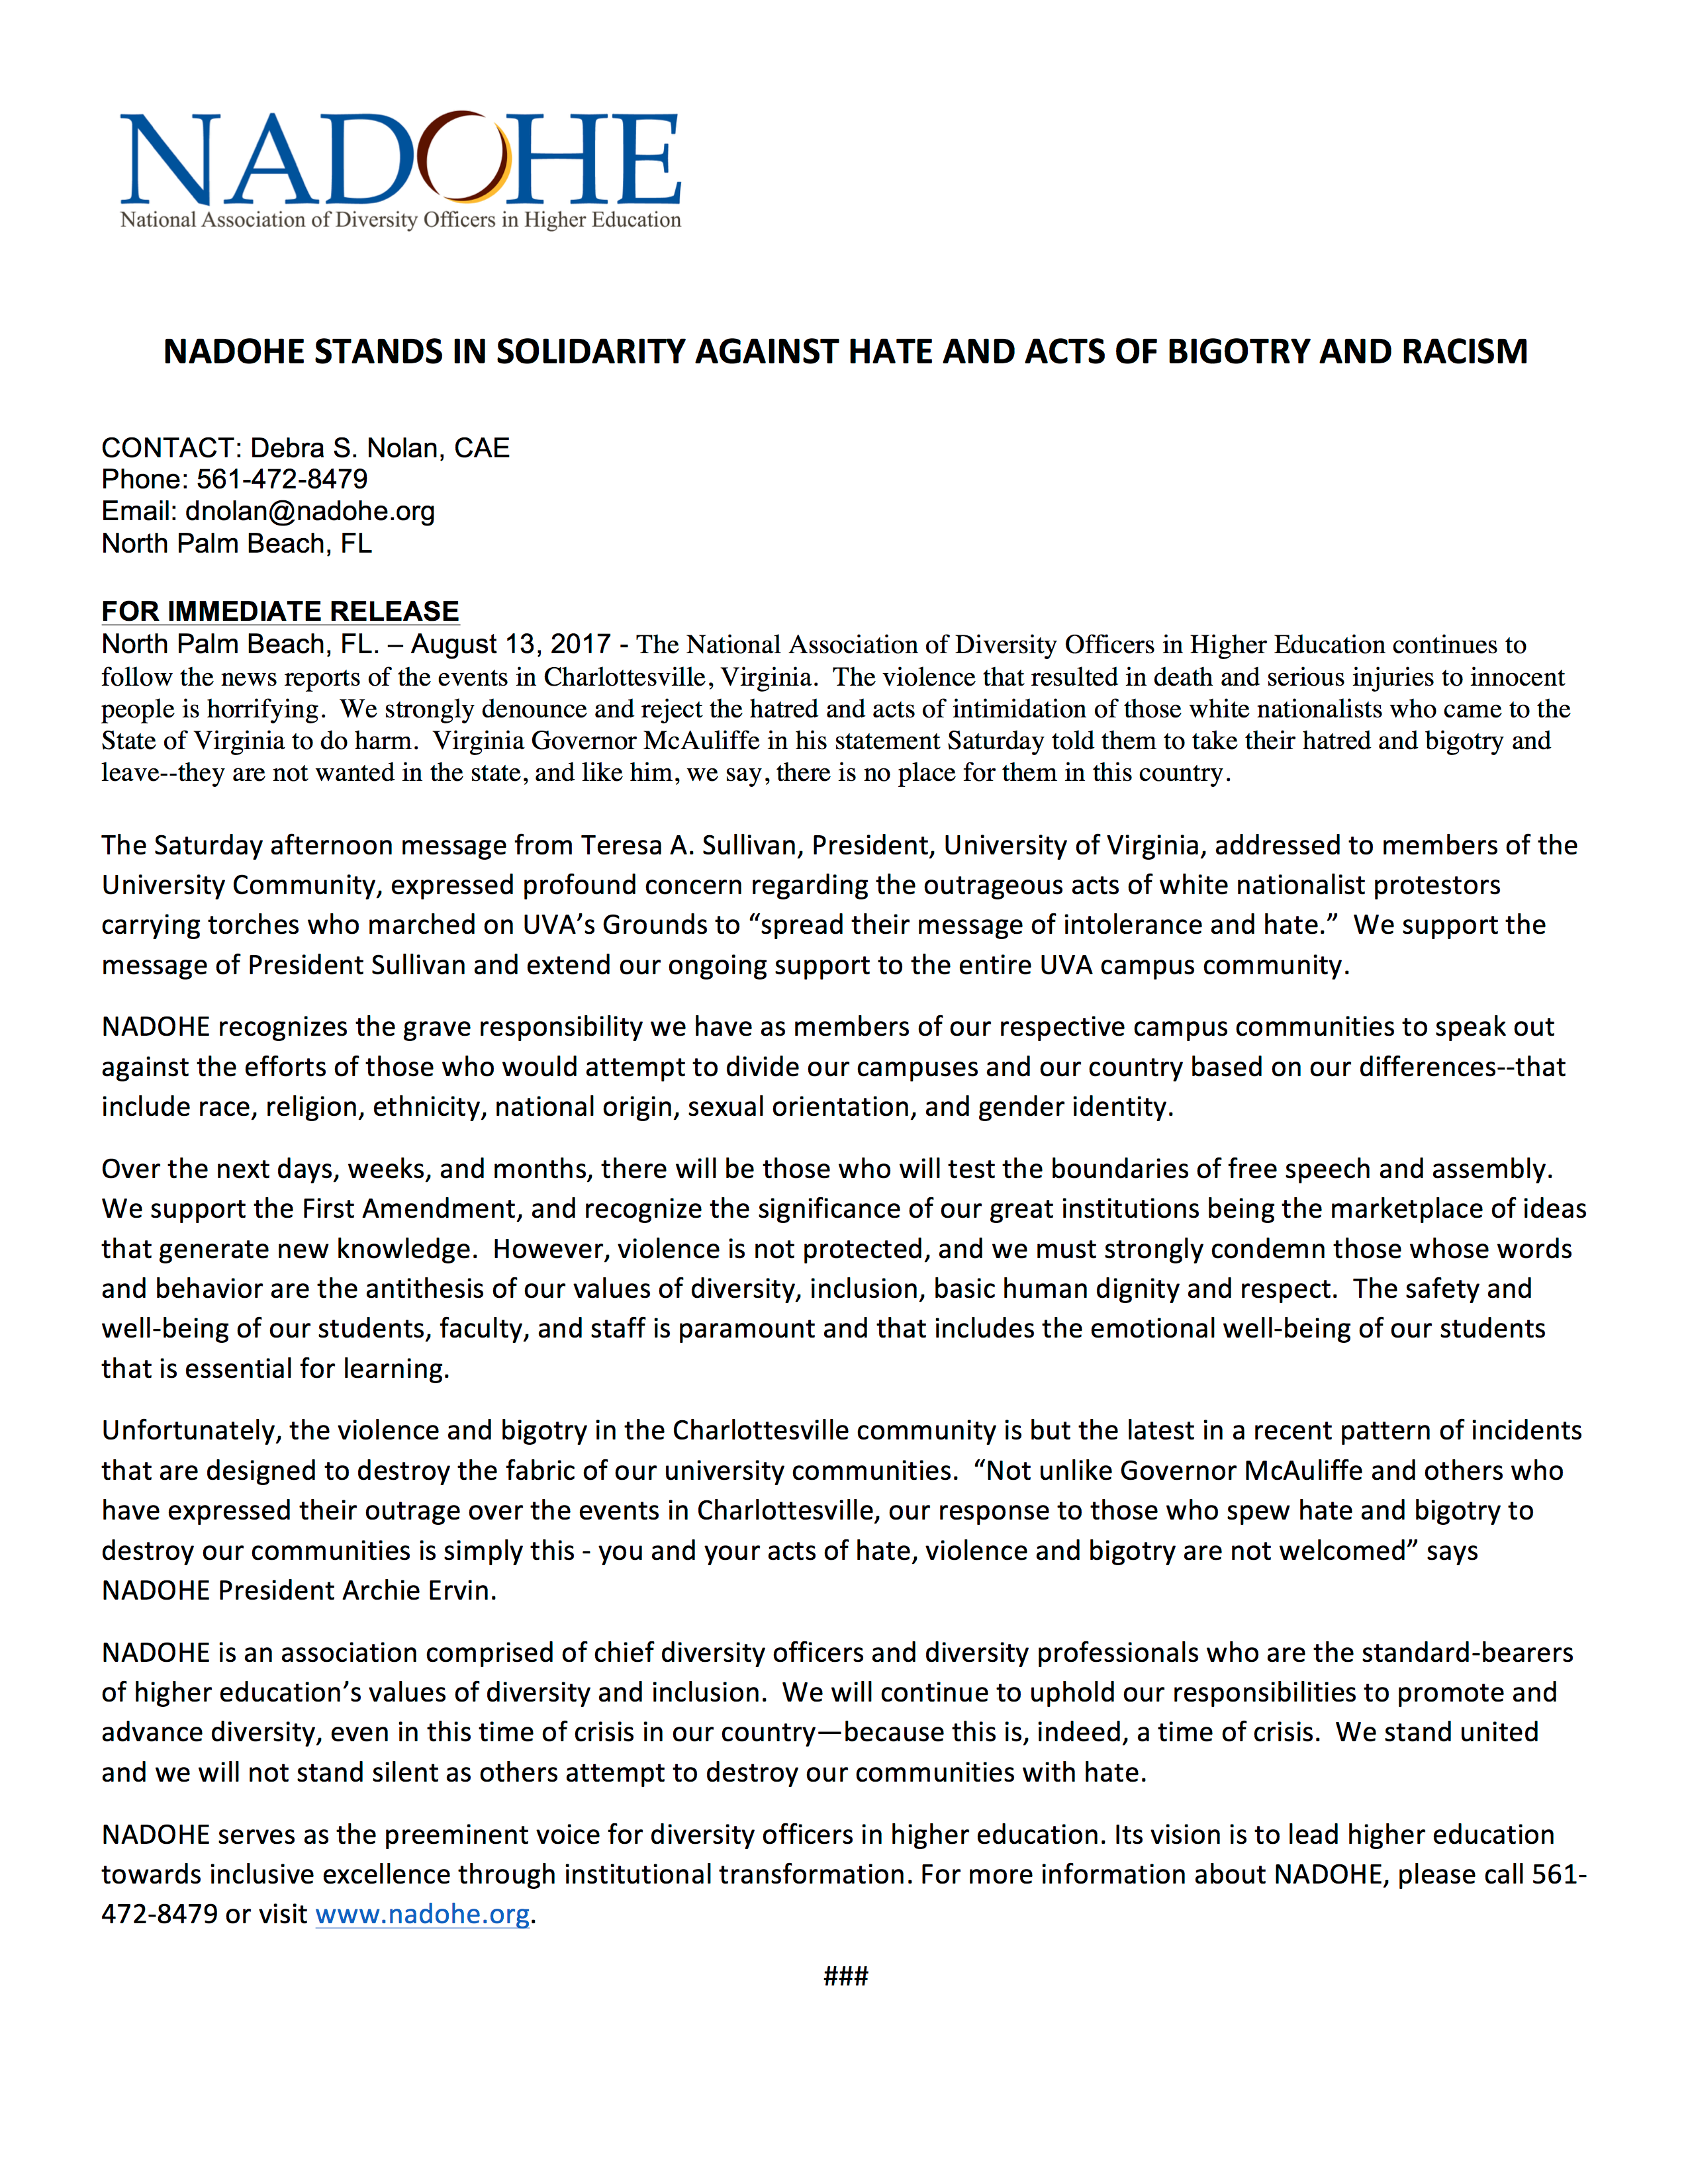 NADOHE statement against hate and acts of bigotry and racism